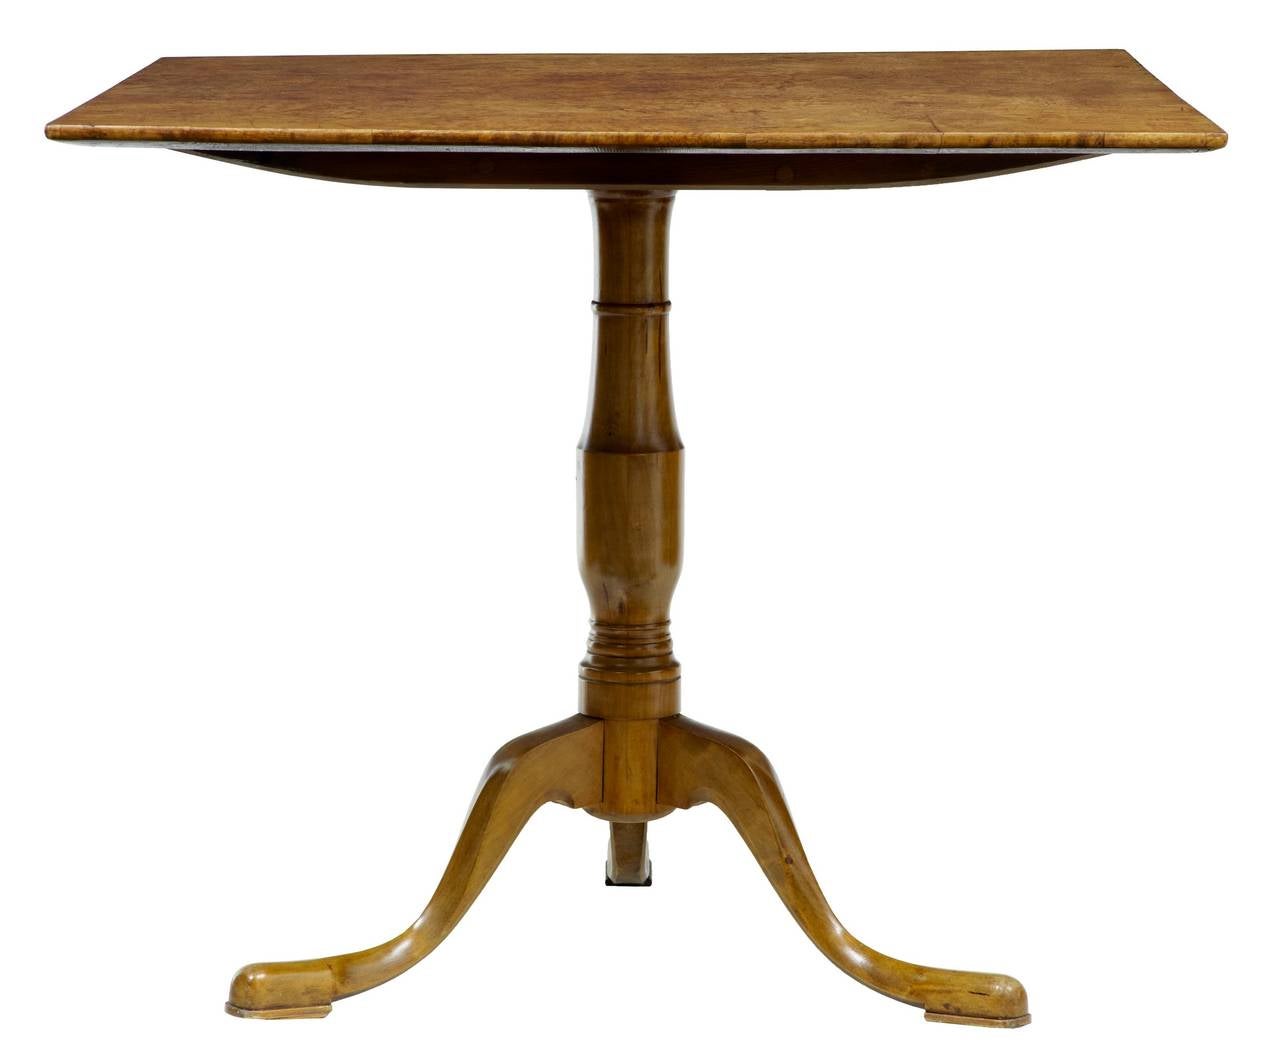 Swedish tilt top table, circa 1840 

Stunning colour and grain on the top. Standing on turned tripod base, terminating on pad foot.

Measures: Height 30